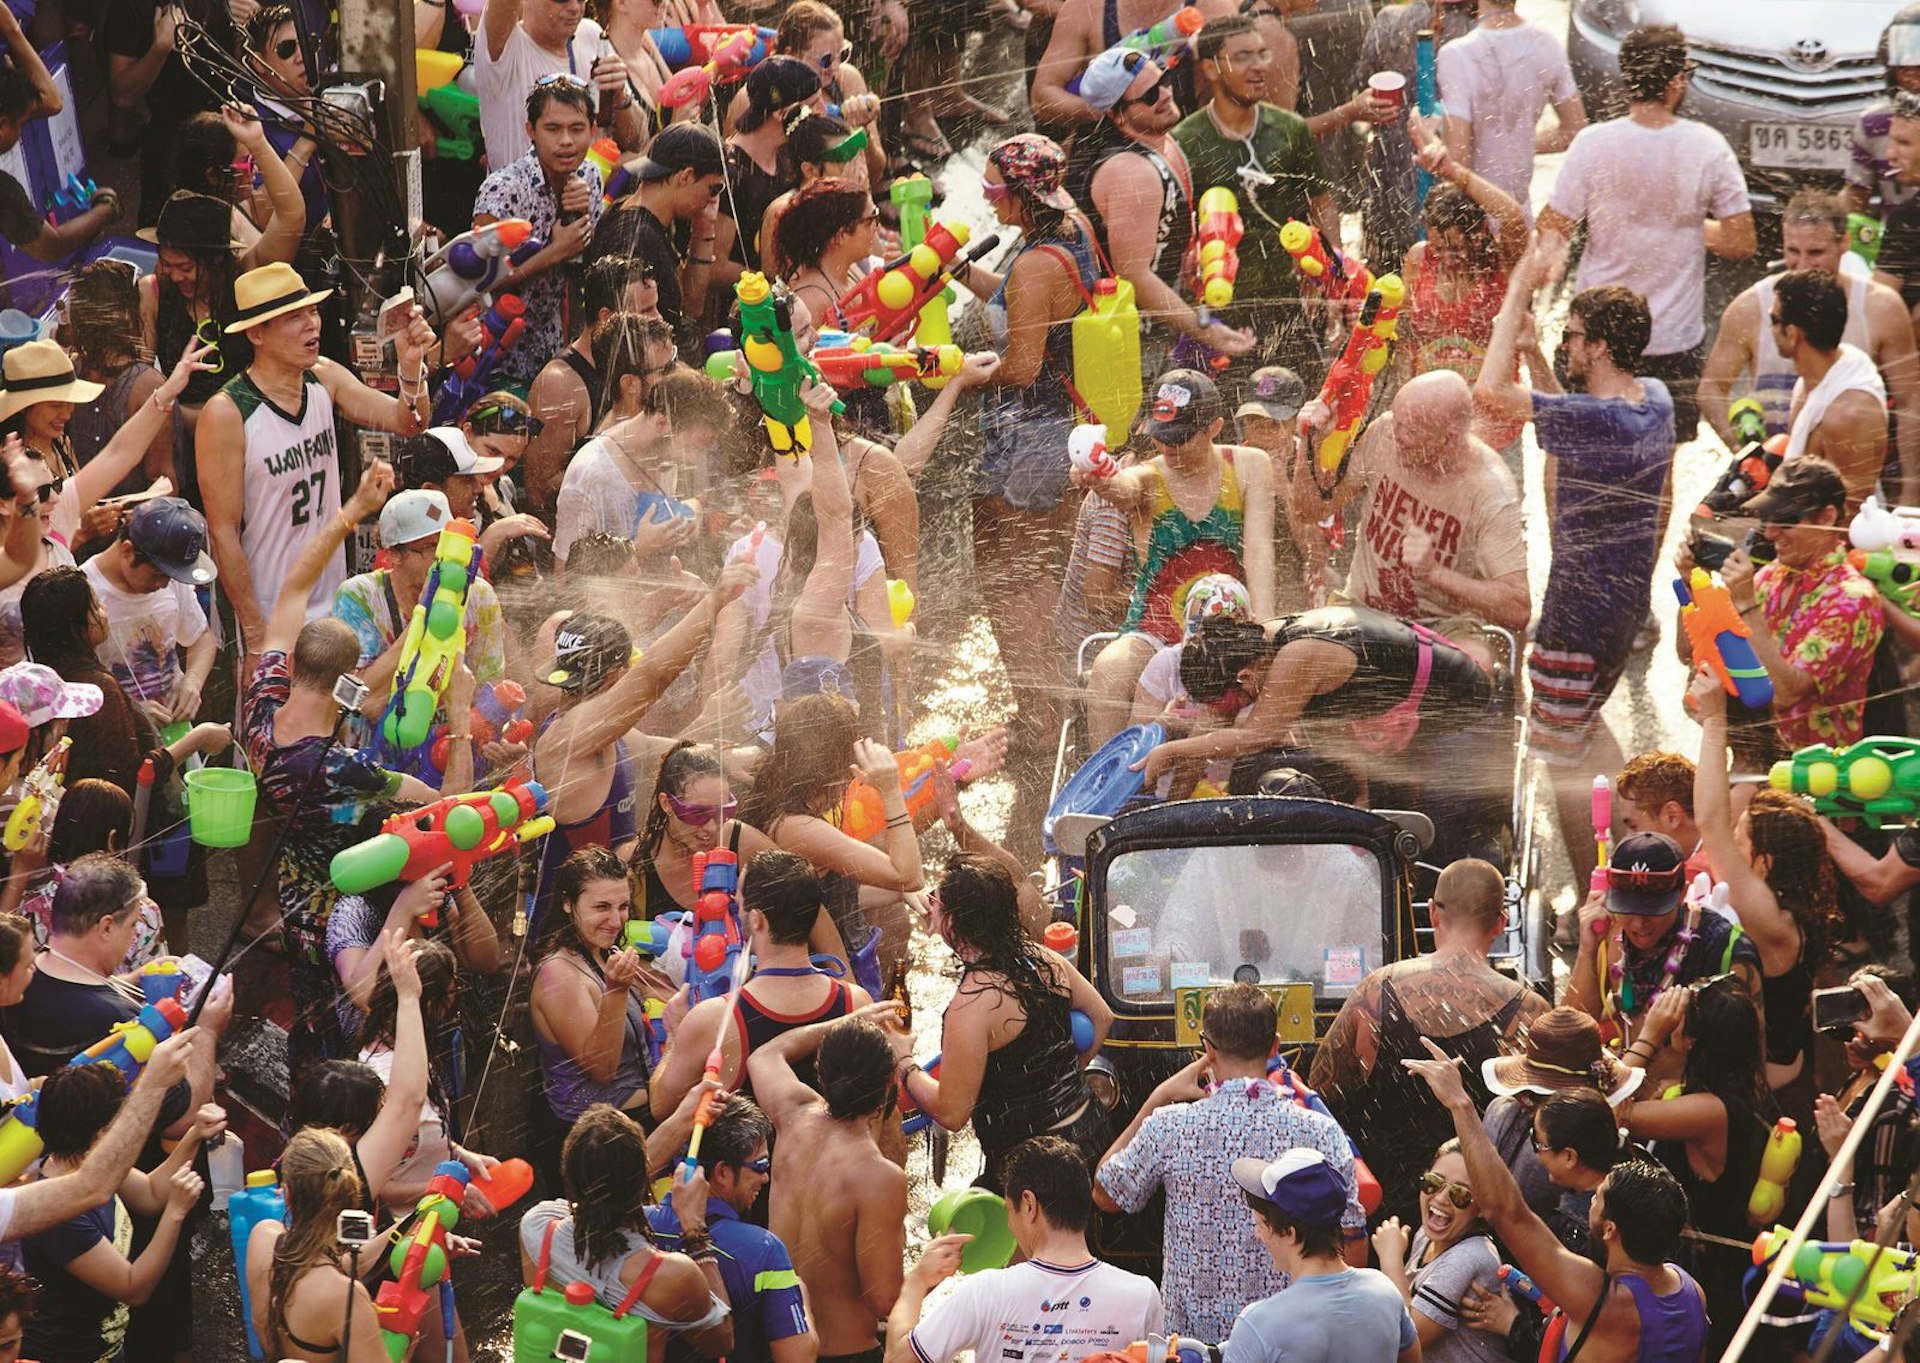 People soaking each other with water during Songkran Festival © Matt Munro / Lonely Planet